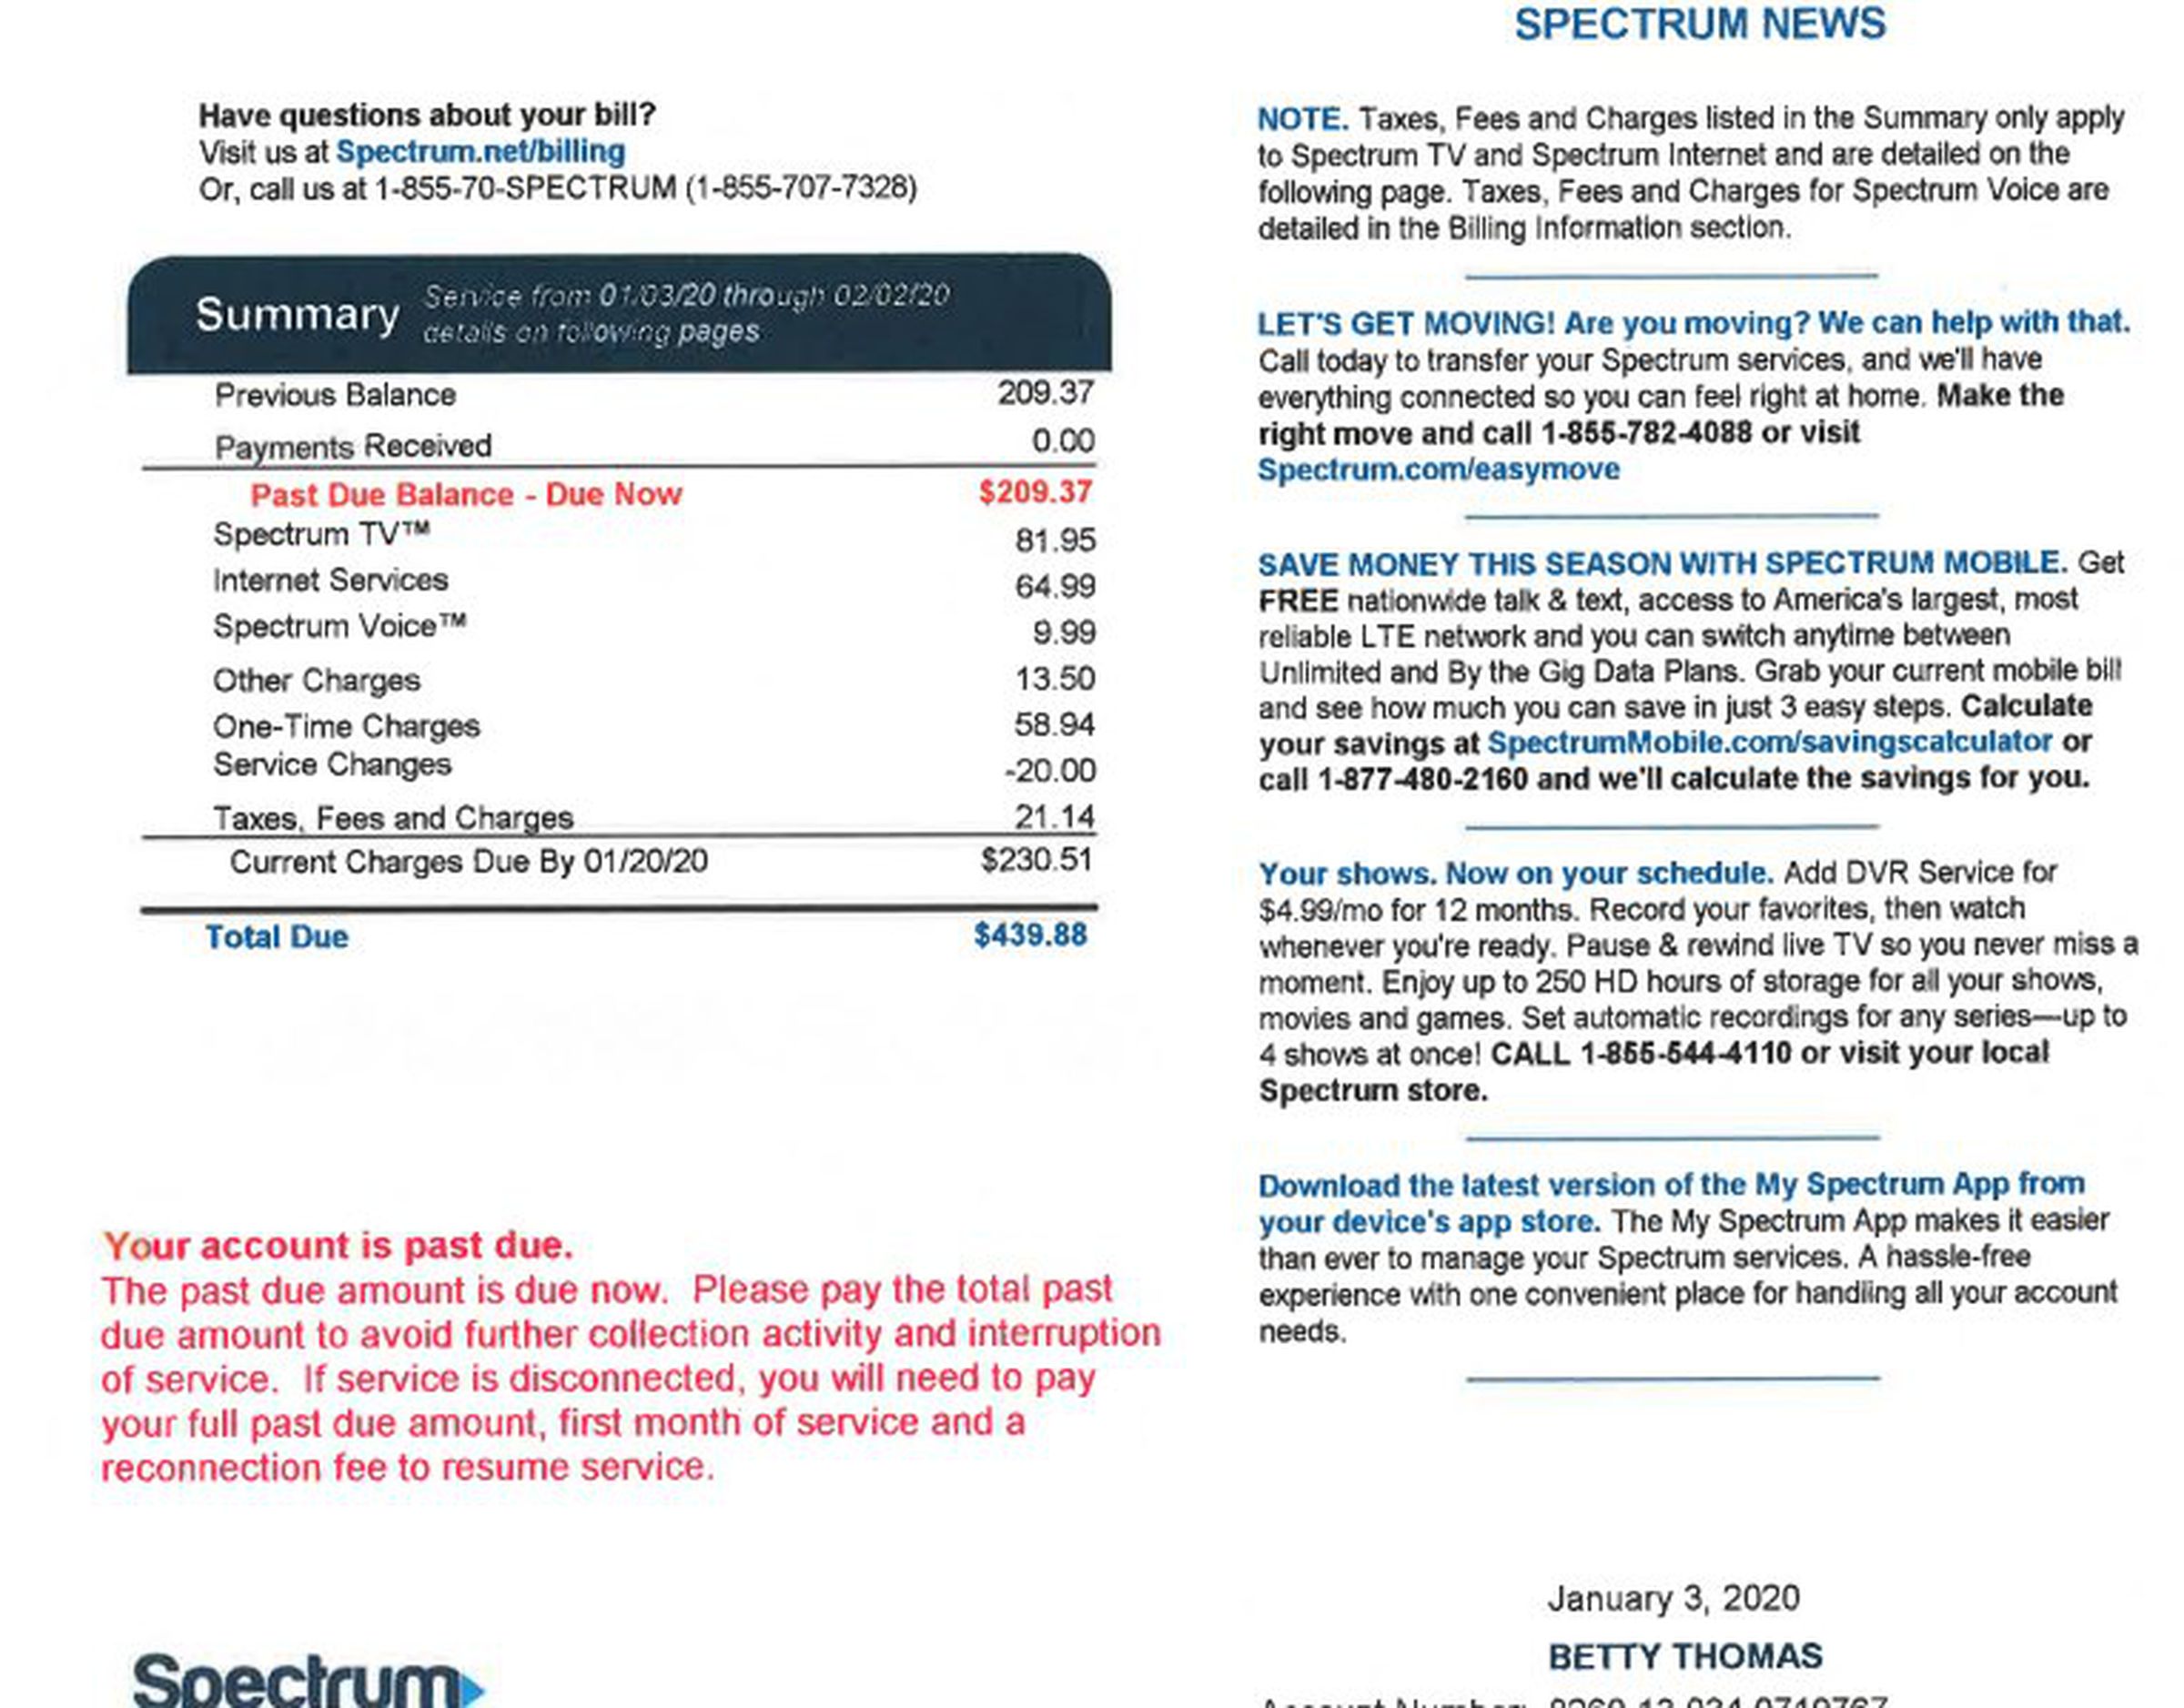 Charter Spectrum bill marked “past due” sent to Betty Thomas in 2020, after she was murdered.